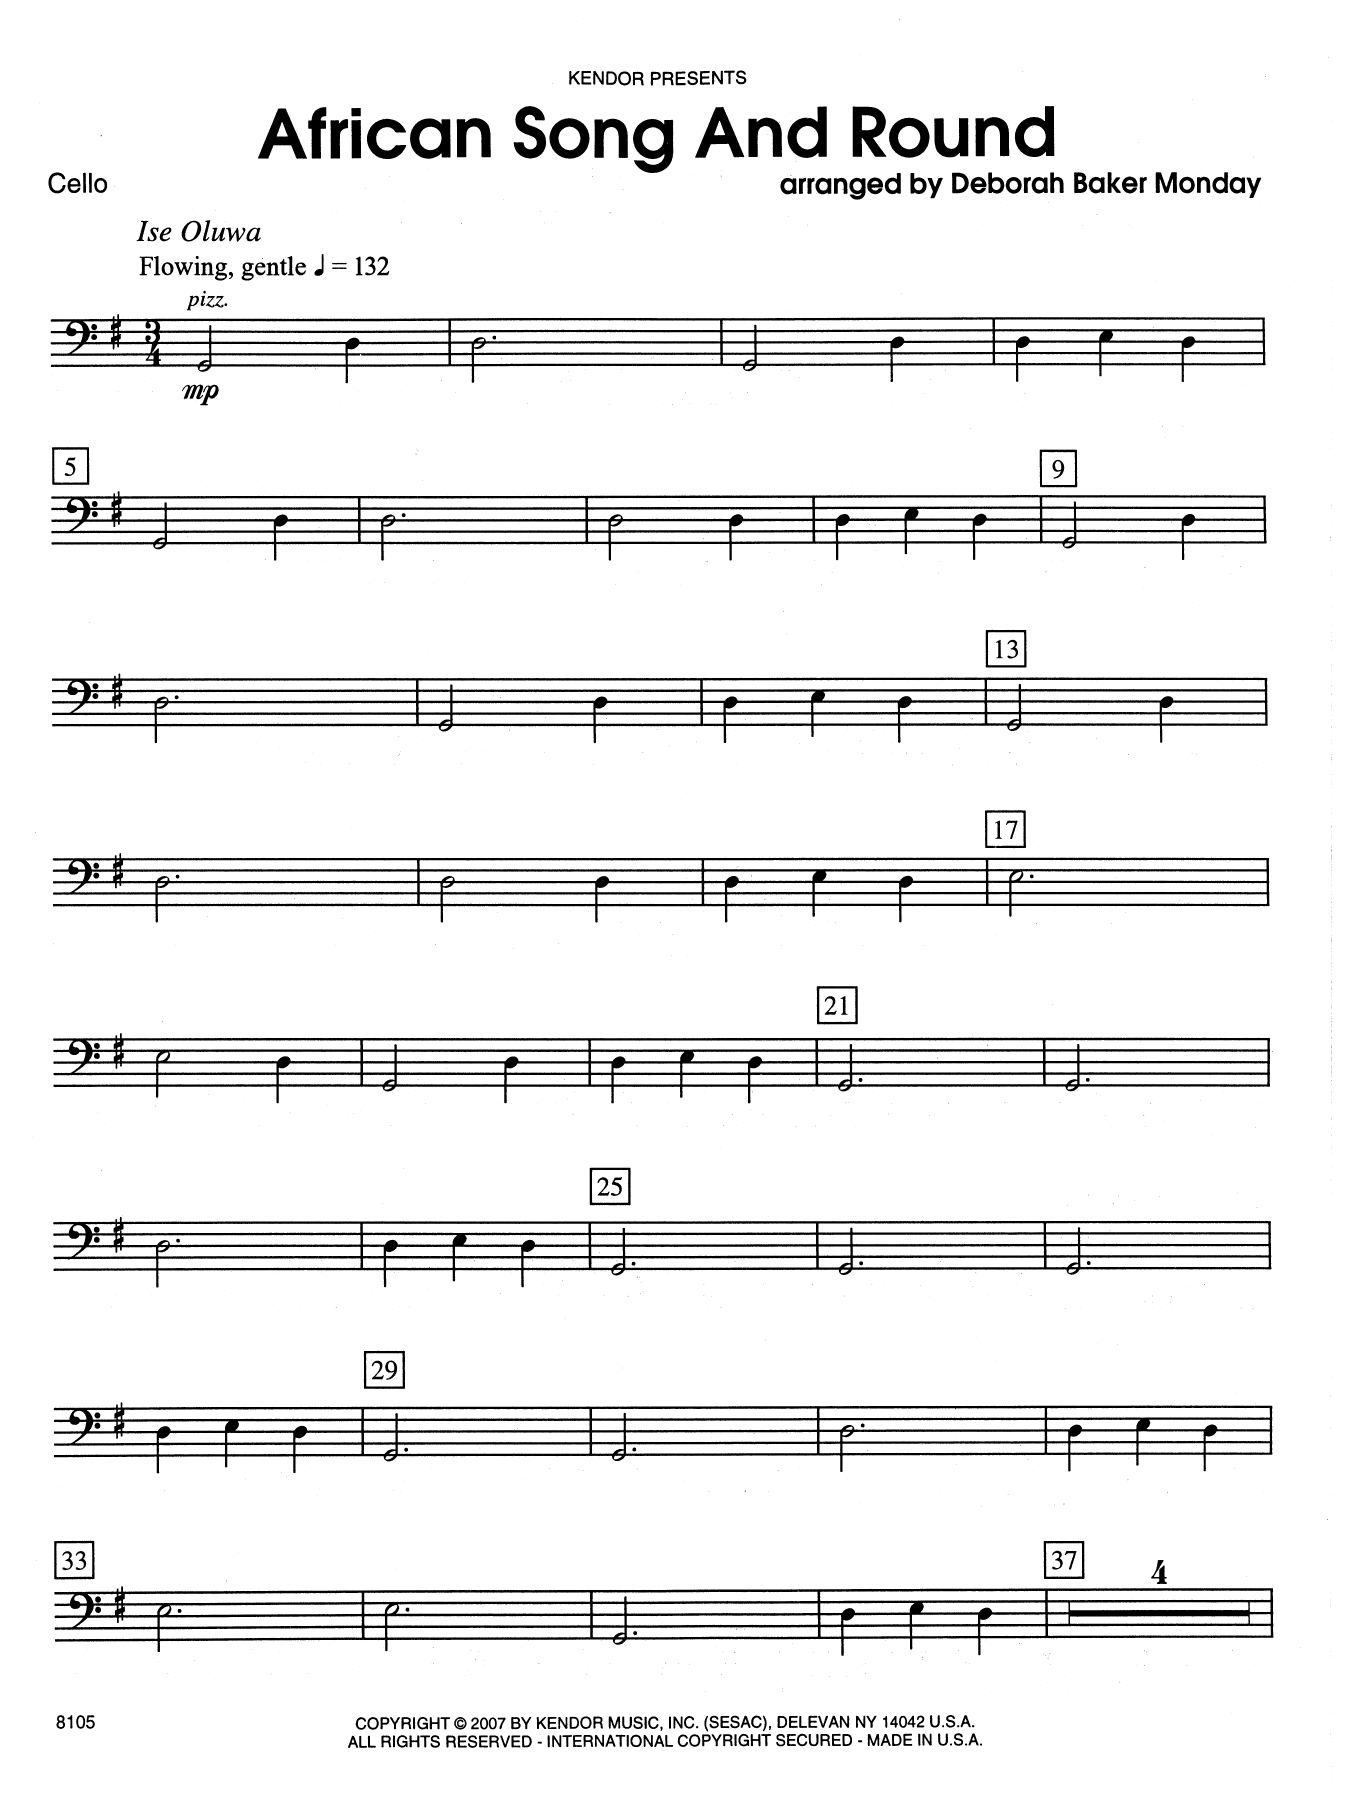 Download Deborah Baker Monday African Song And Round - Cello Sheet Music